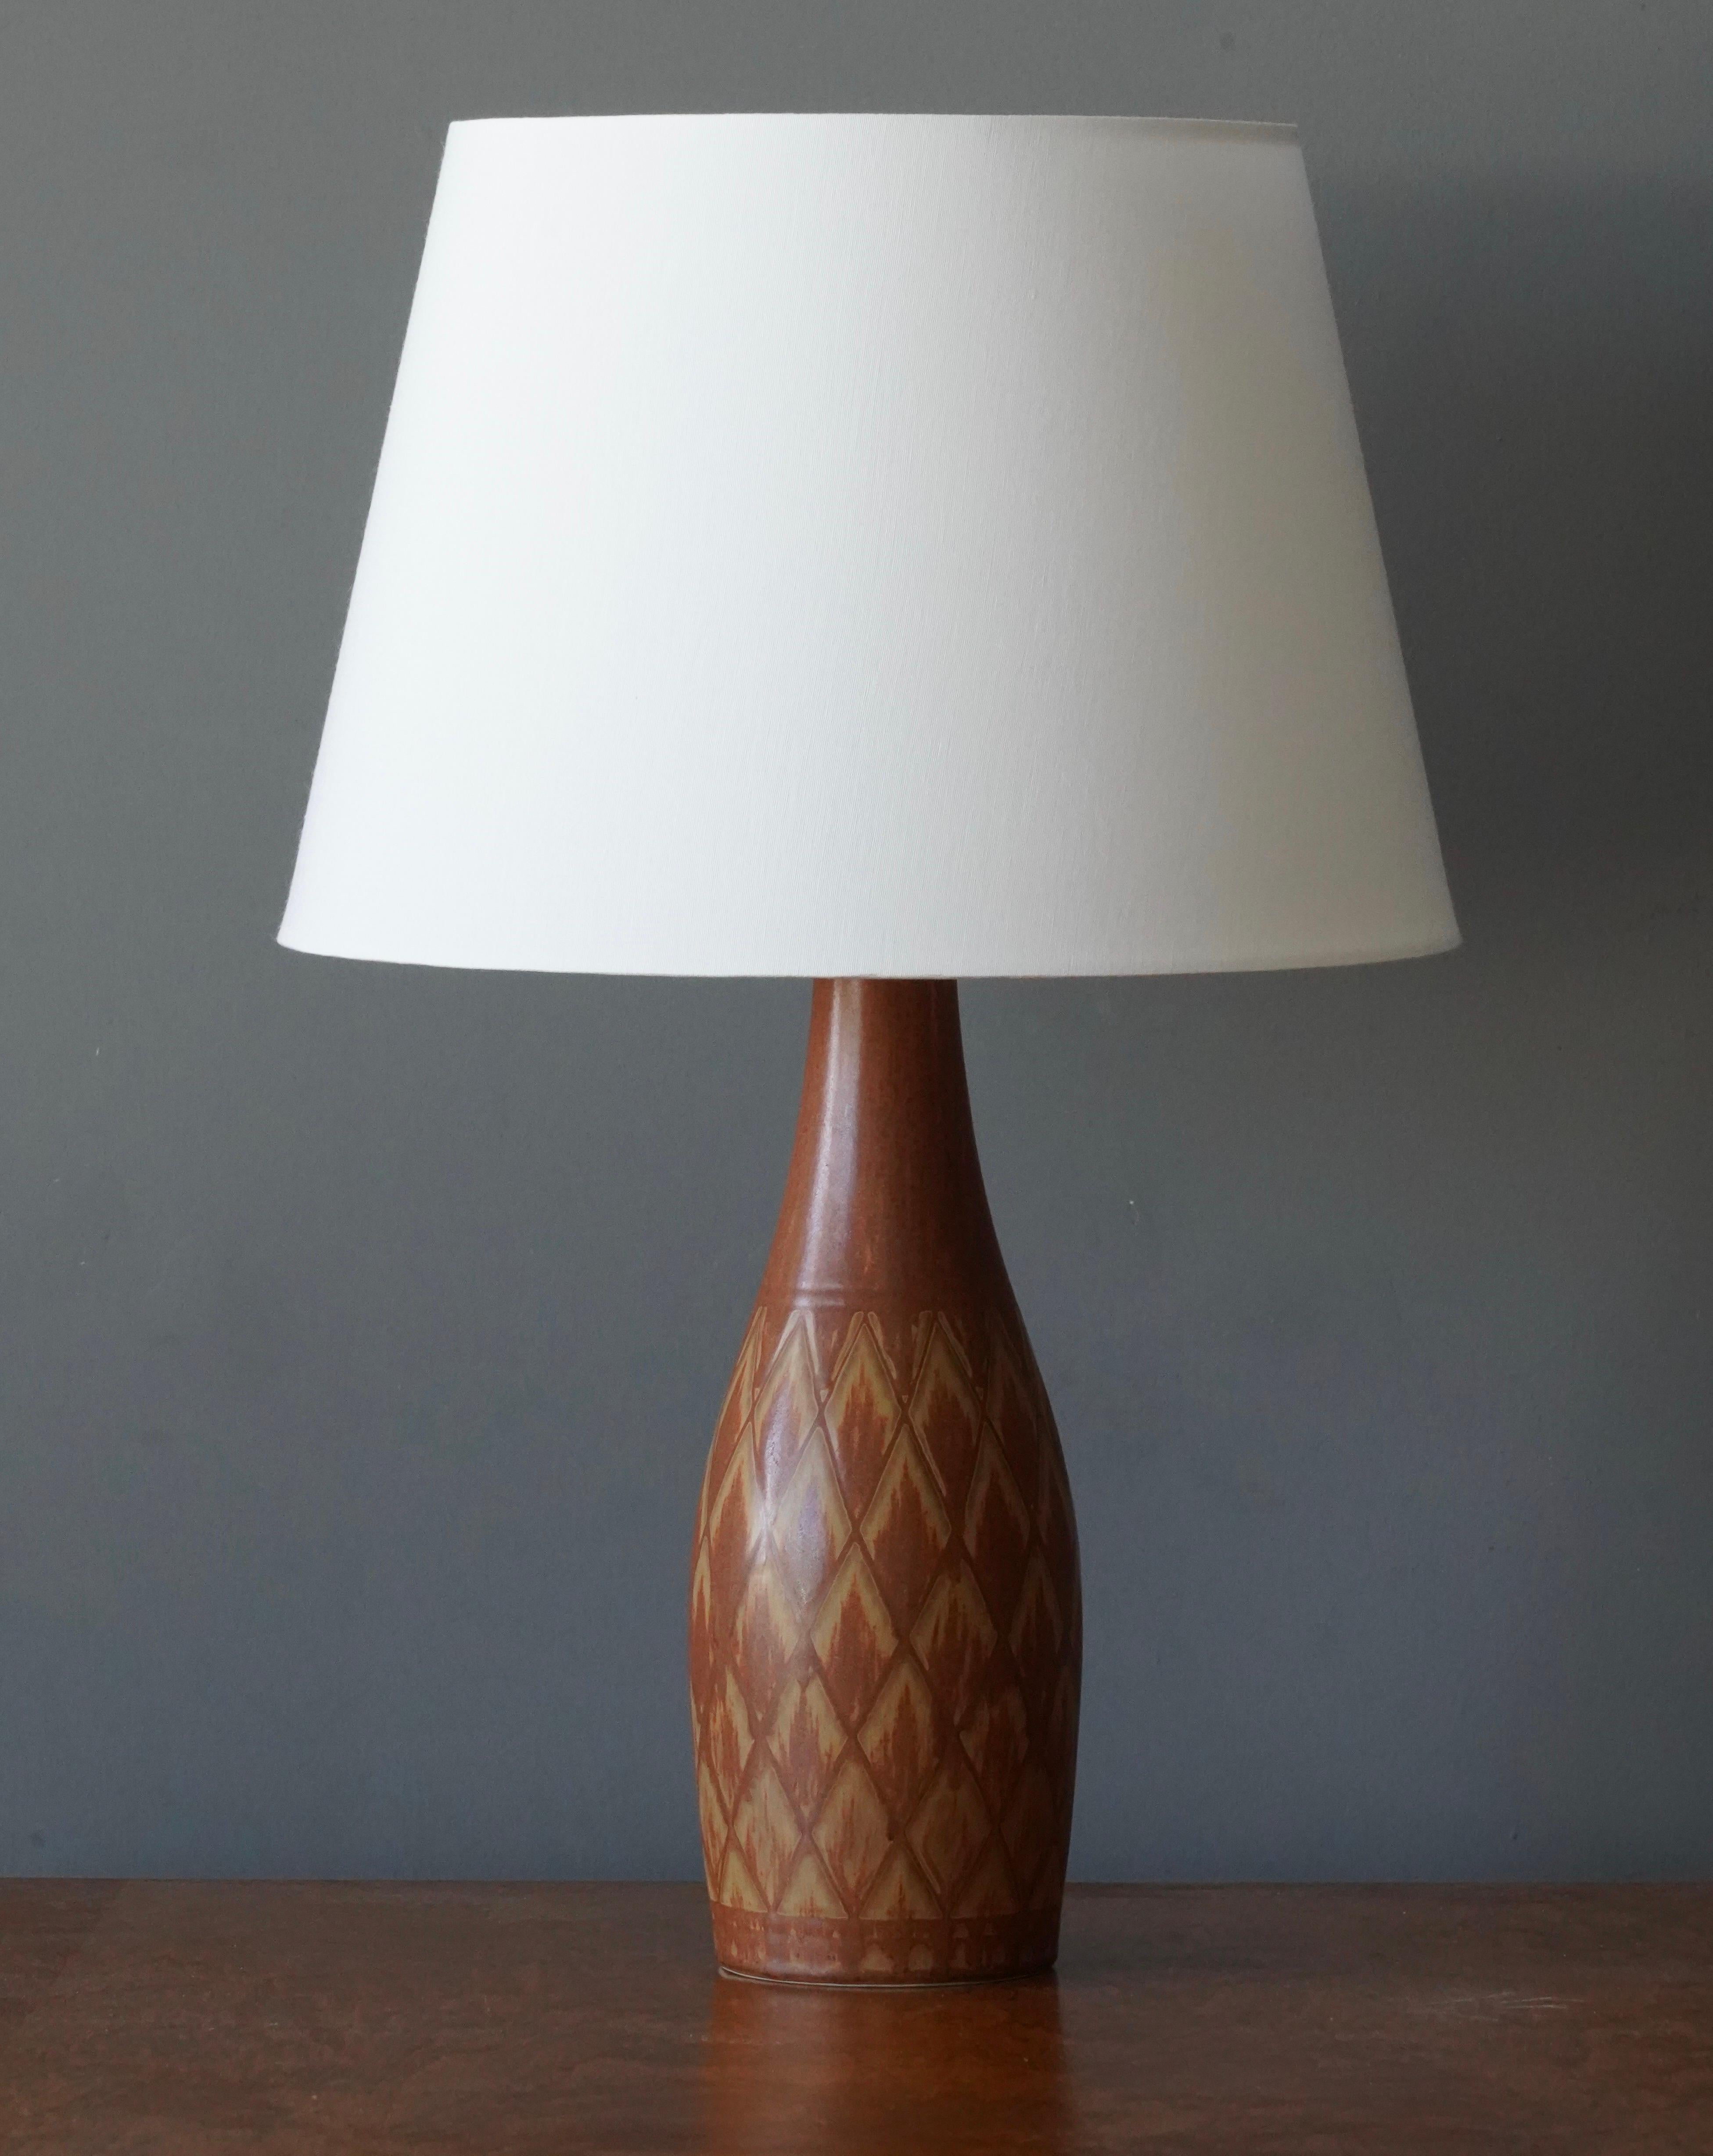 A table lamp produced by Rörstrand, Sweden, 1950s. Designed by Gunnar Nylund, (Swedish, 1914-1997). Signed. 

Sold without lampshade. Stated dimensions exclude lampshade, height includes socket.

Nylund served as artistic director at Rörstrand,